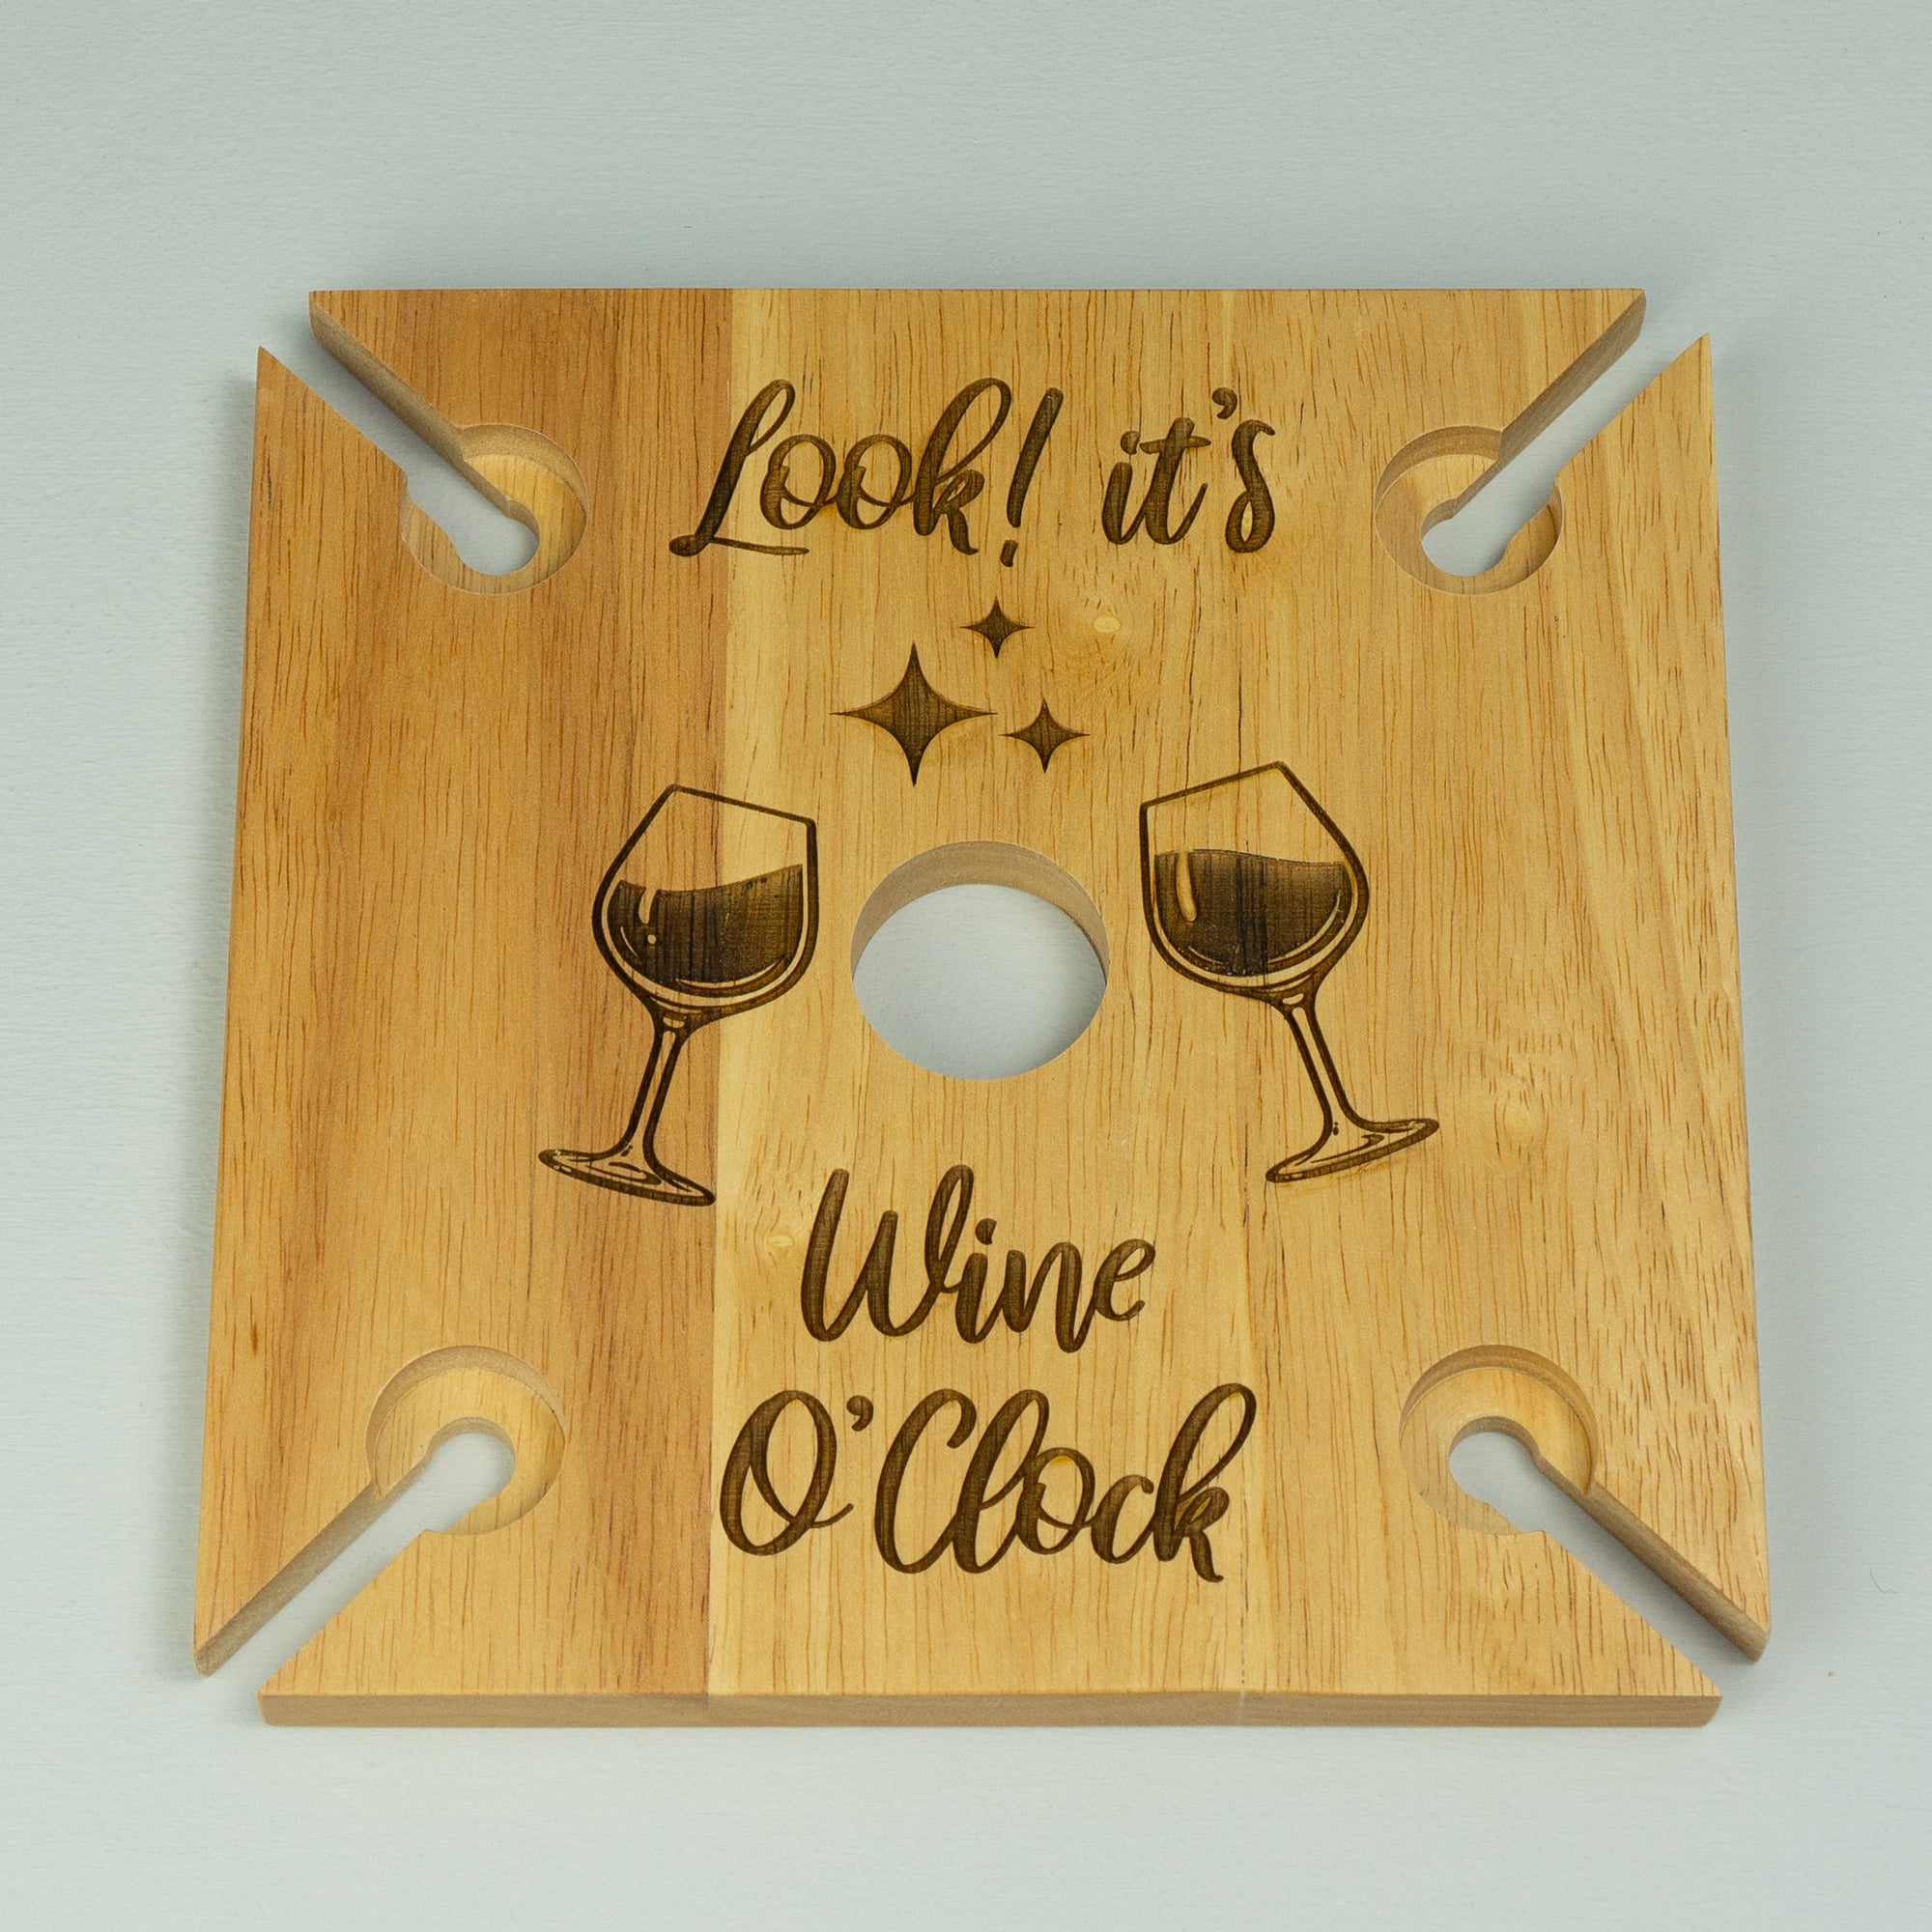 Wooden wine glass and bottle holder